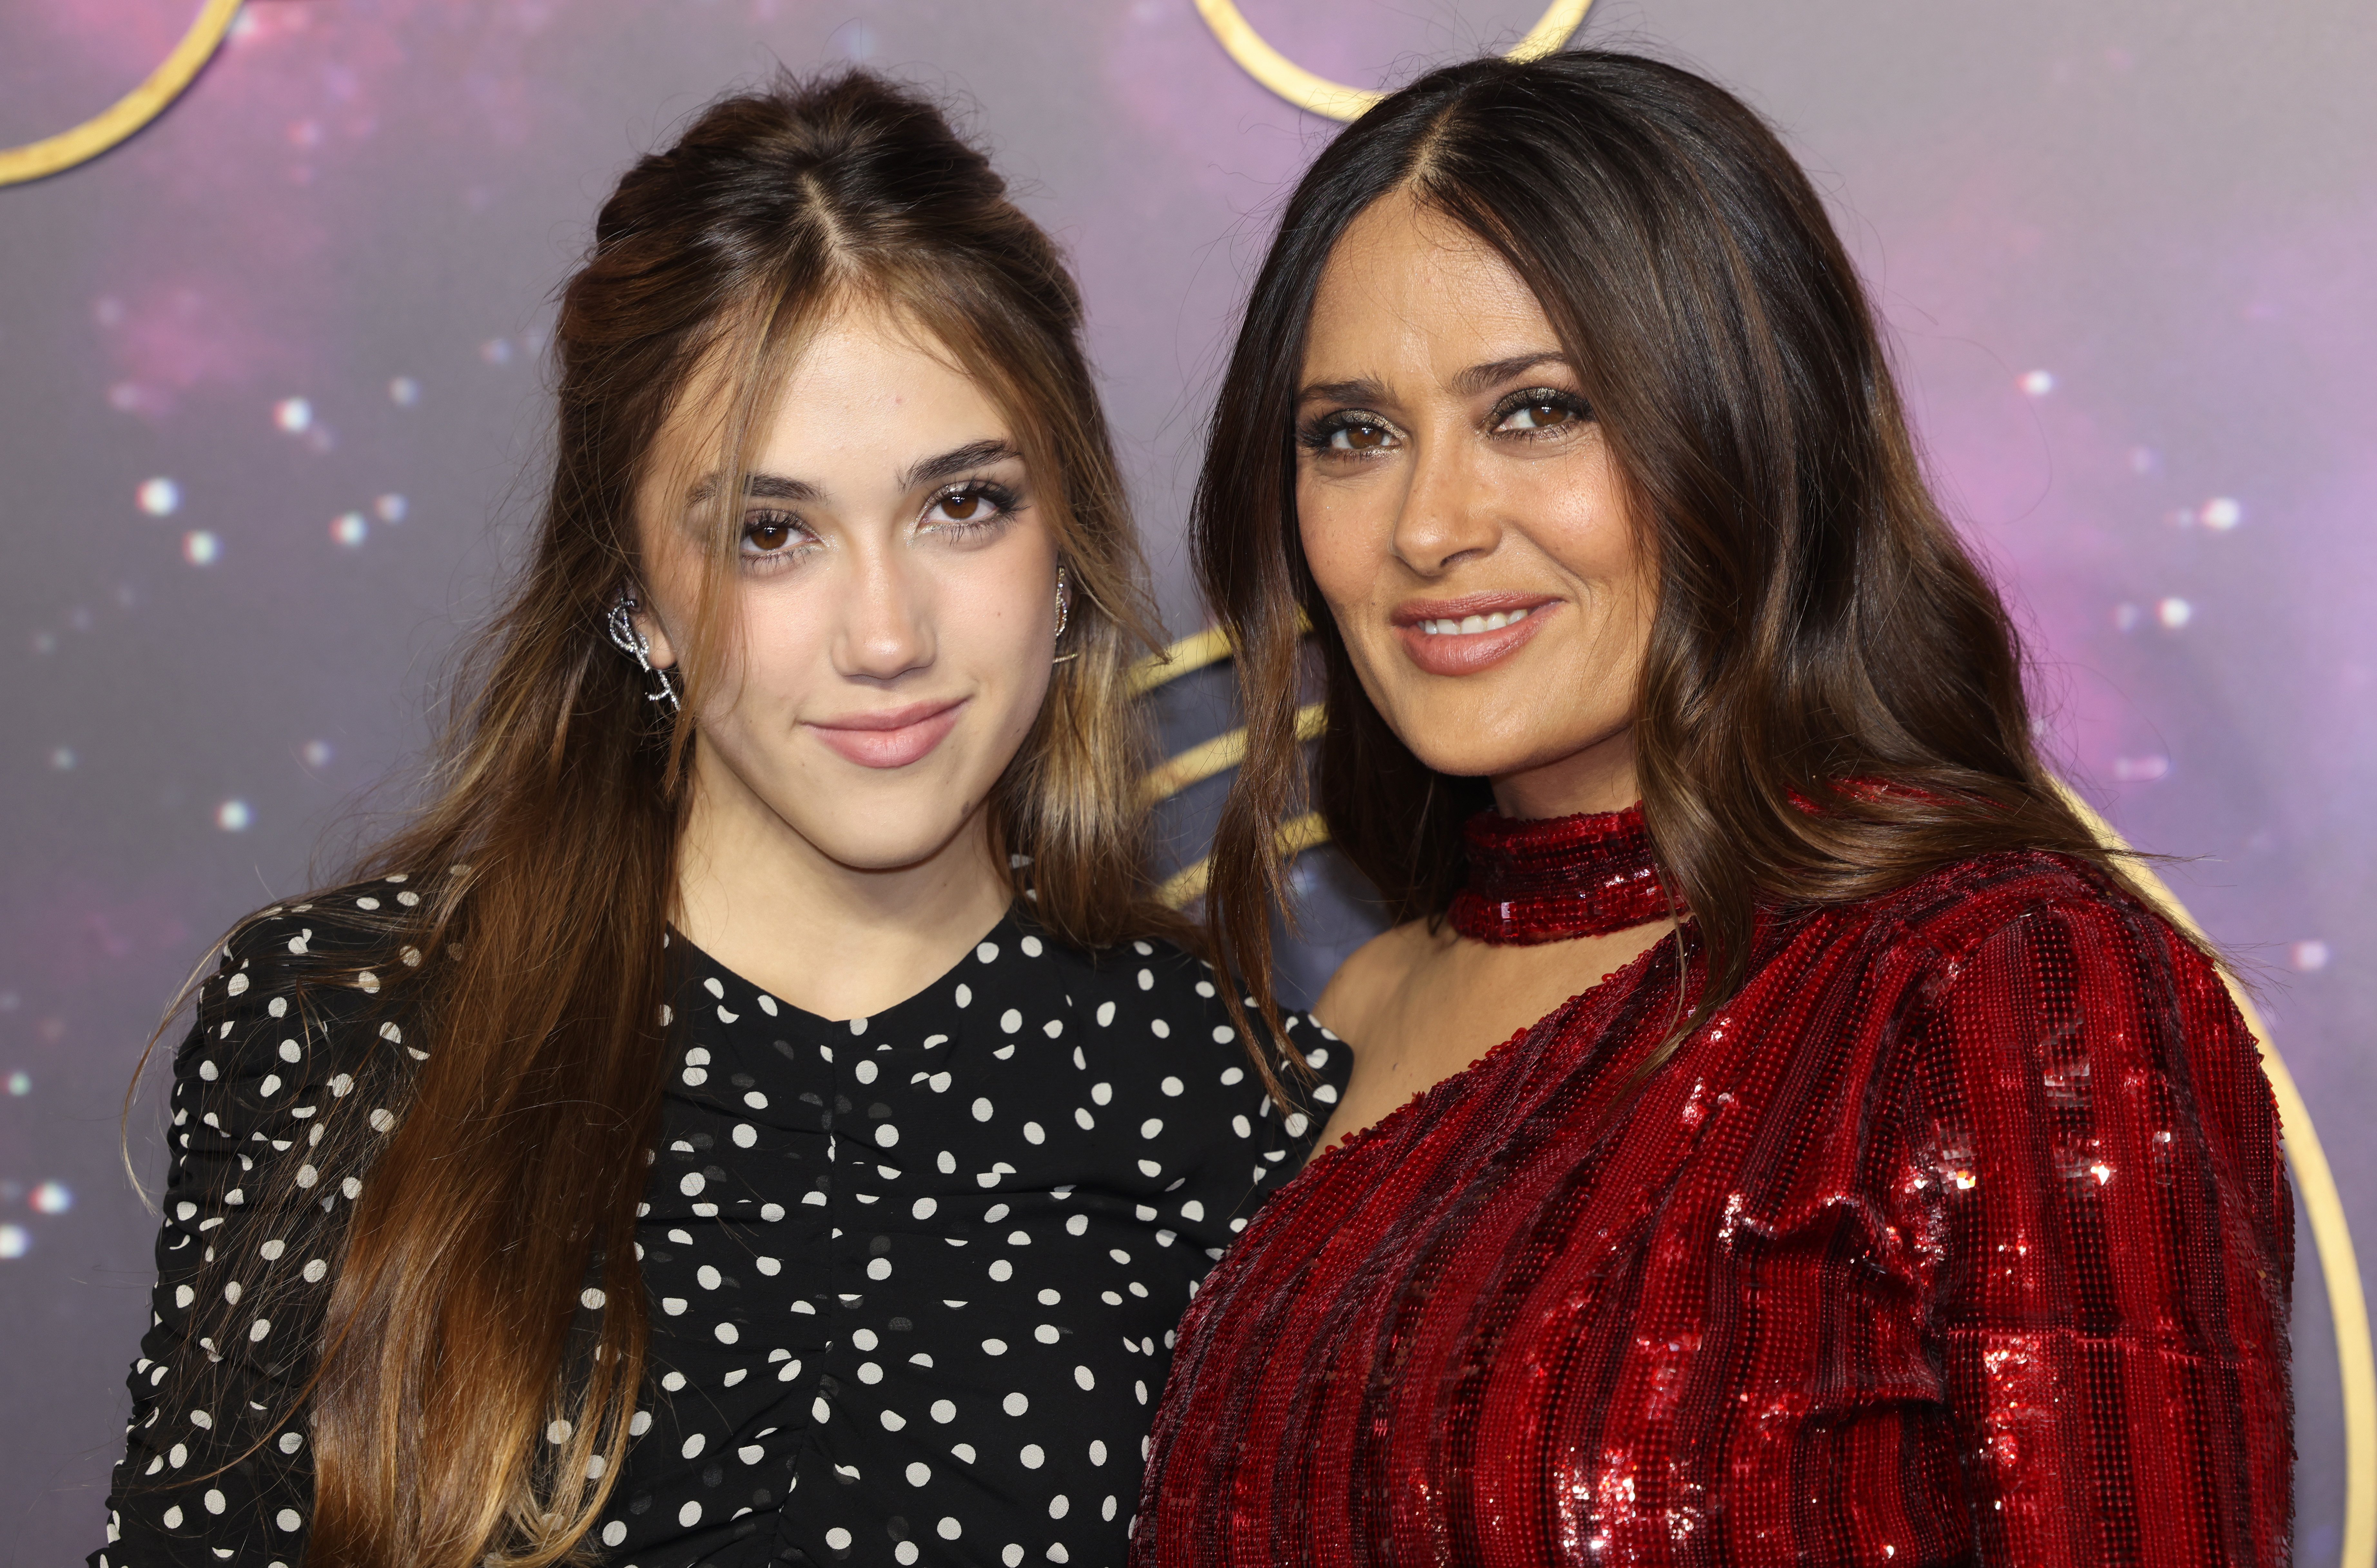 Salma Hayek (R) with her daughter Valentina Paloma Pinault attend the "Eternals" UK Premiere at the BFI IMAX Waterloo on October 27, 2021. | Photo: Getty Images